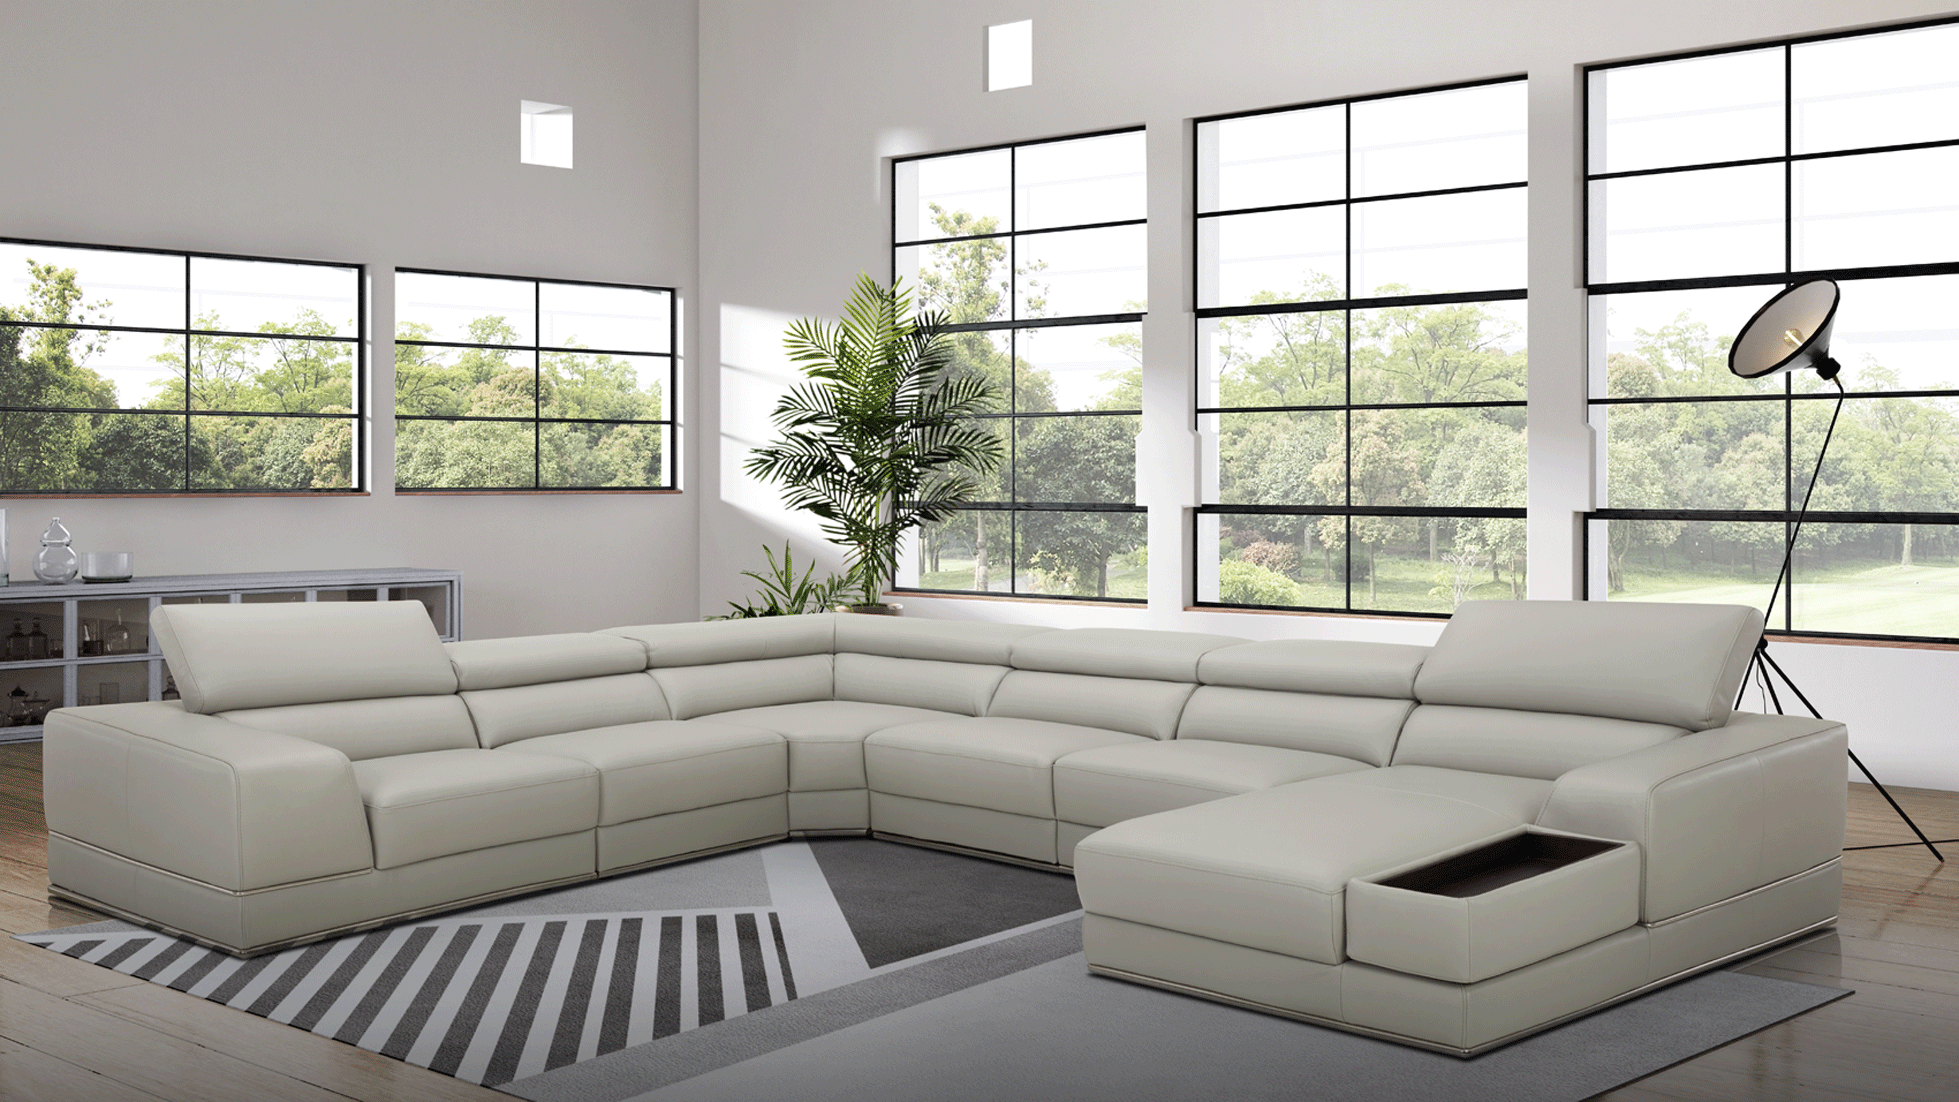 Brands SVN Modern Living Special Order 1576 Sectional Right by Kuka